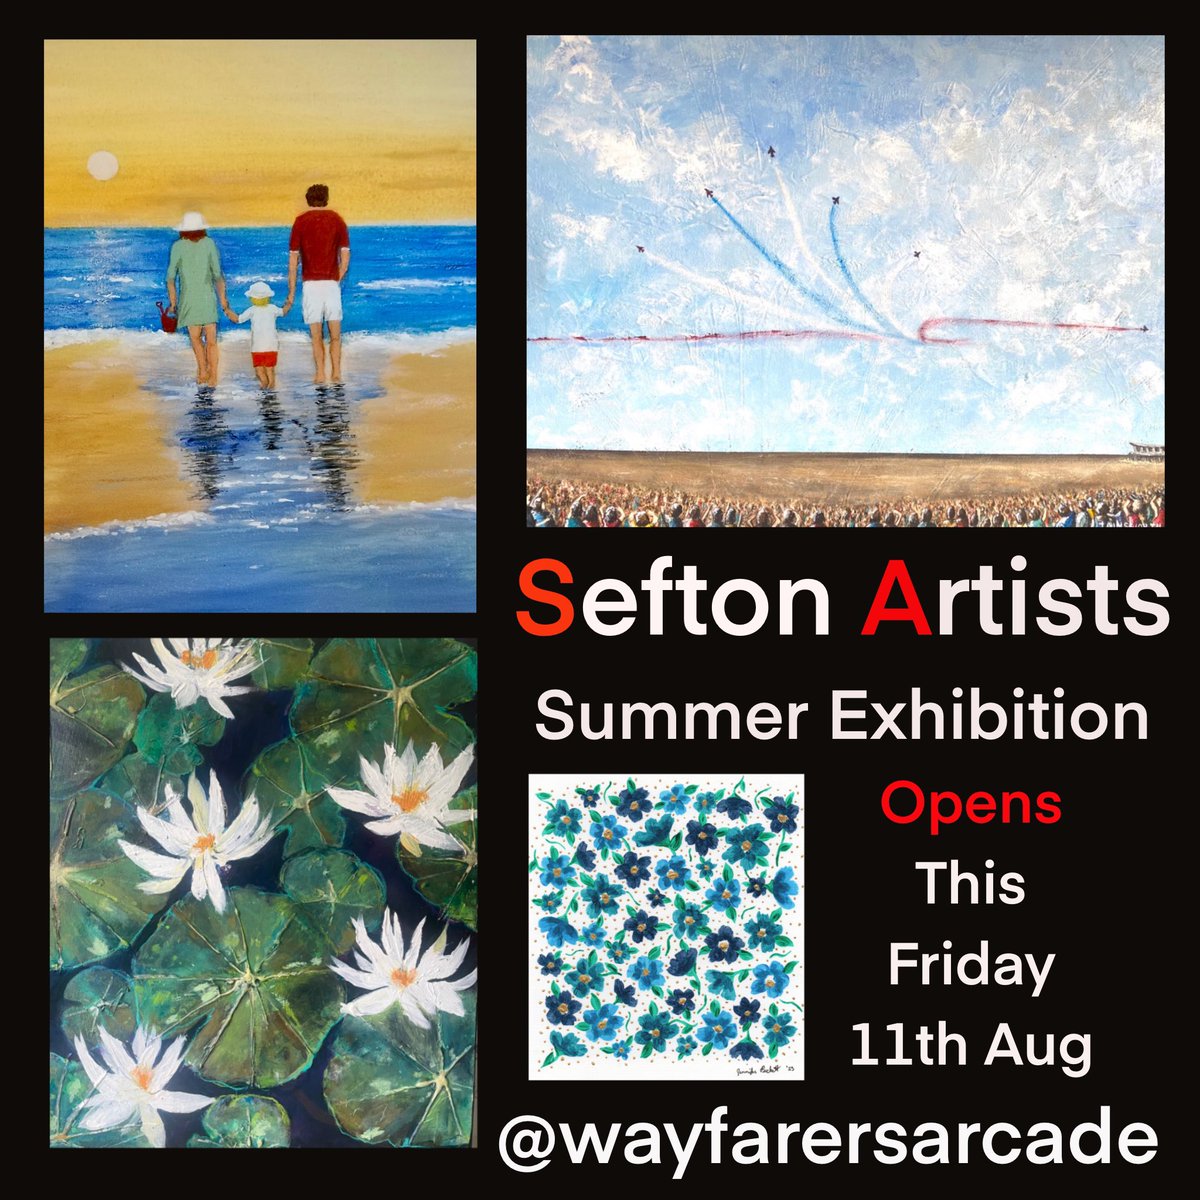 Our Summer Exhibition opens this Friday 11th August! Here’s a little taster of what you might see but you will have to visit to get a proper look! See you there! You can see dates and opening times on the poster. #seftonhour #yoursouthport